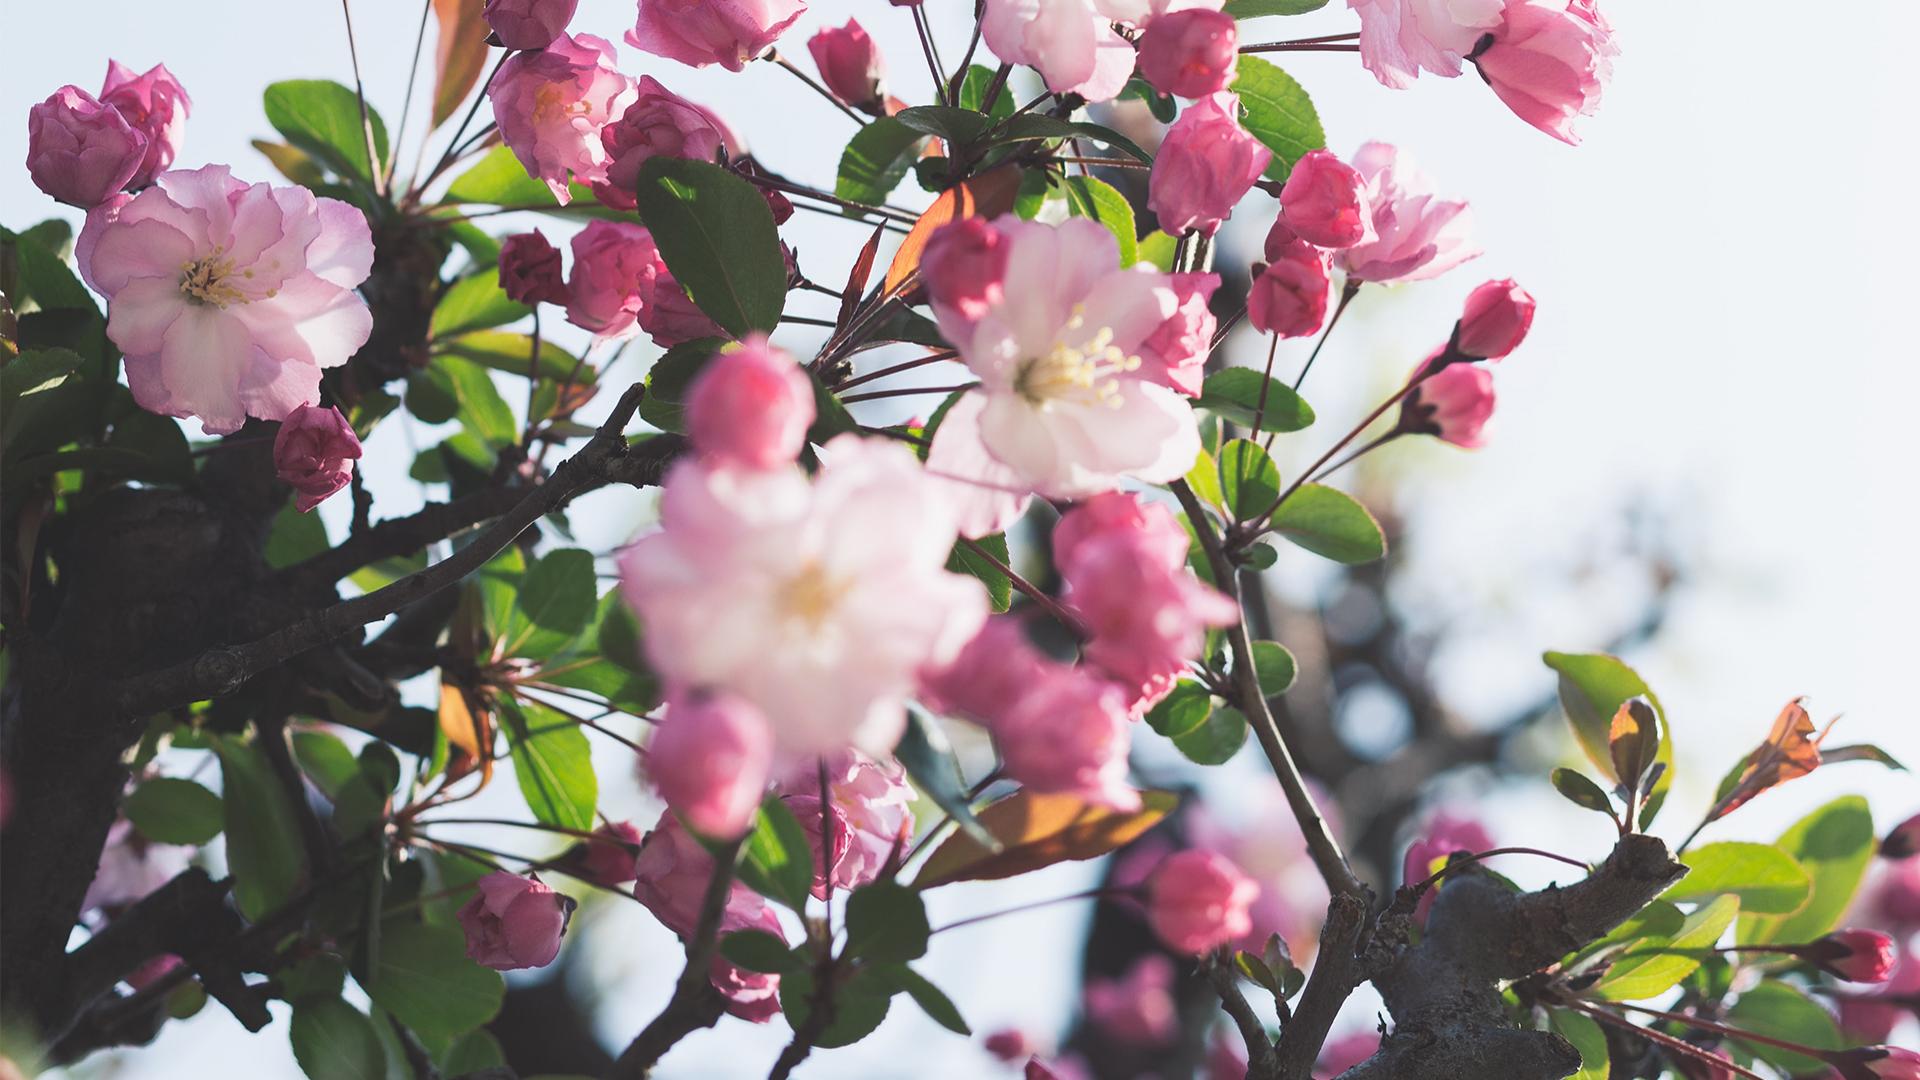 Legend of the almond tree blossom: Spring in the Algarve